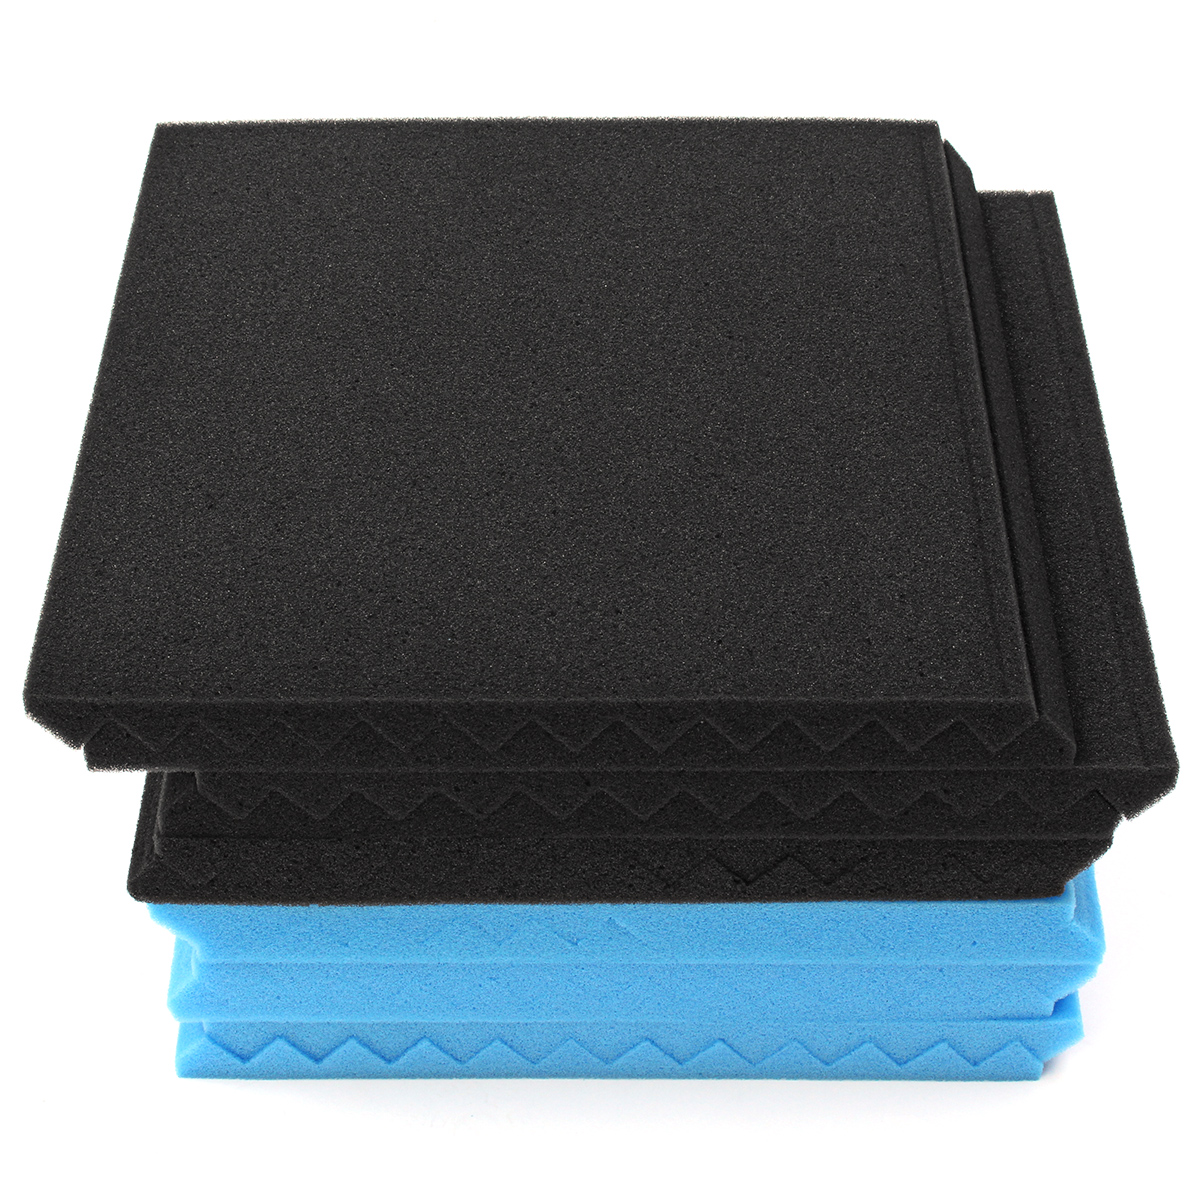 Find 12PCS Soundproofing Foam Tiles Kits Black Blue for Sale on Gipsybee.com with cryptocurrencies